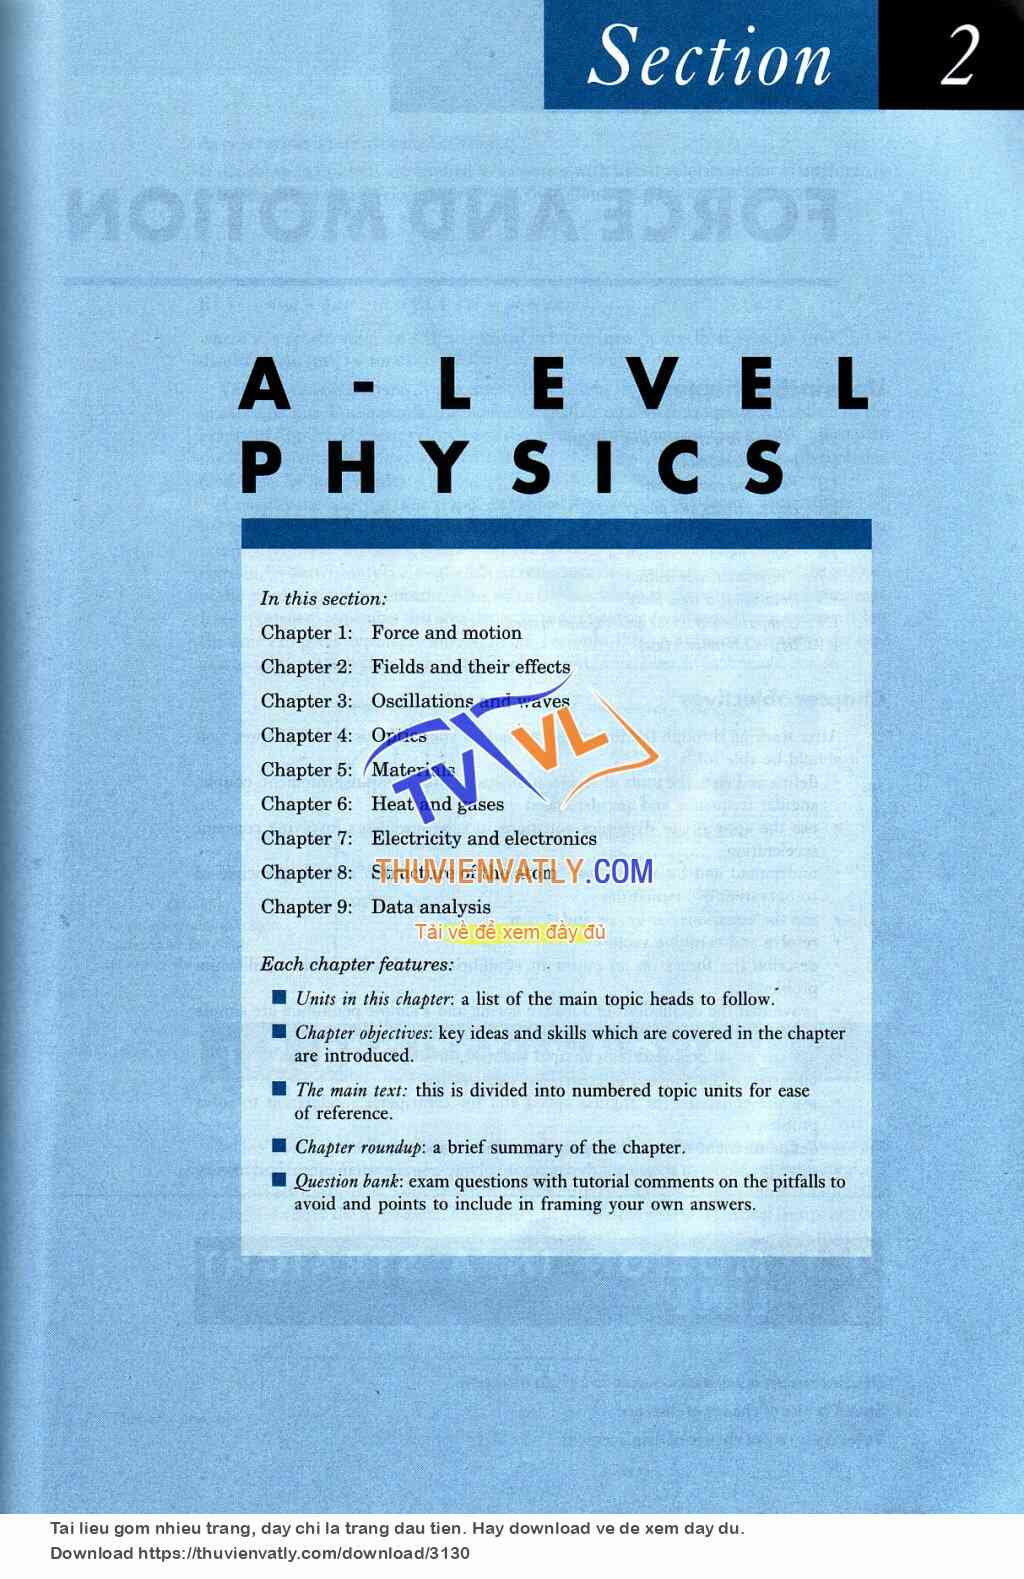 A level Physics - 1. Force and motion